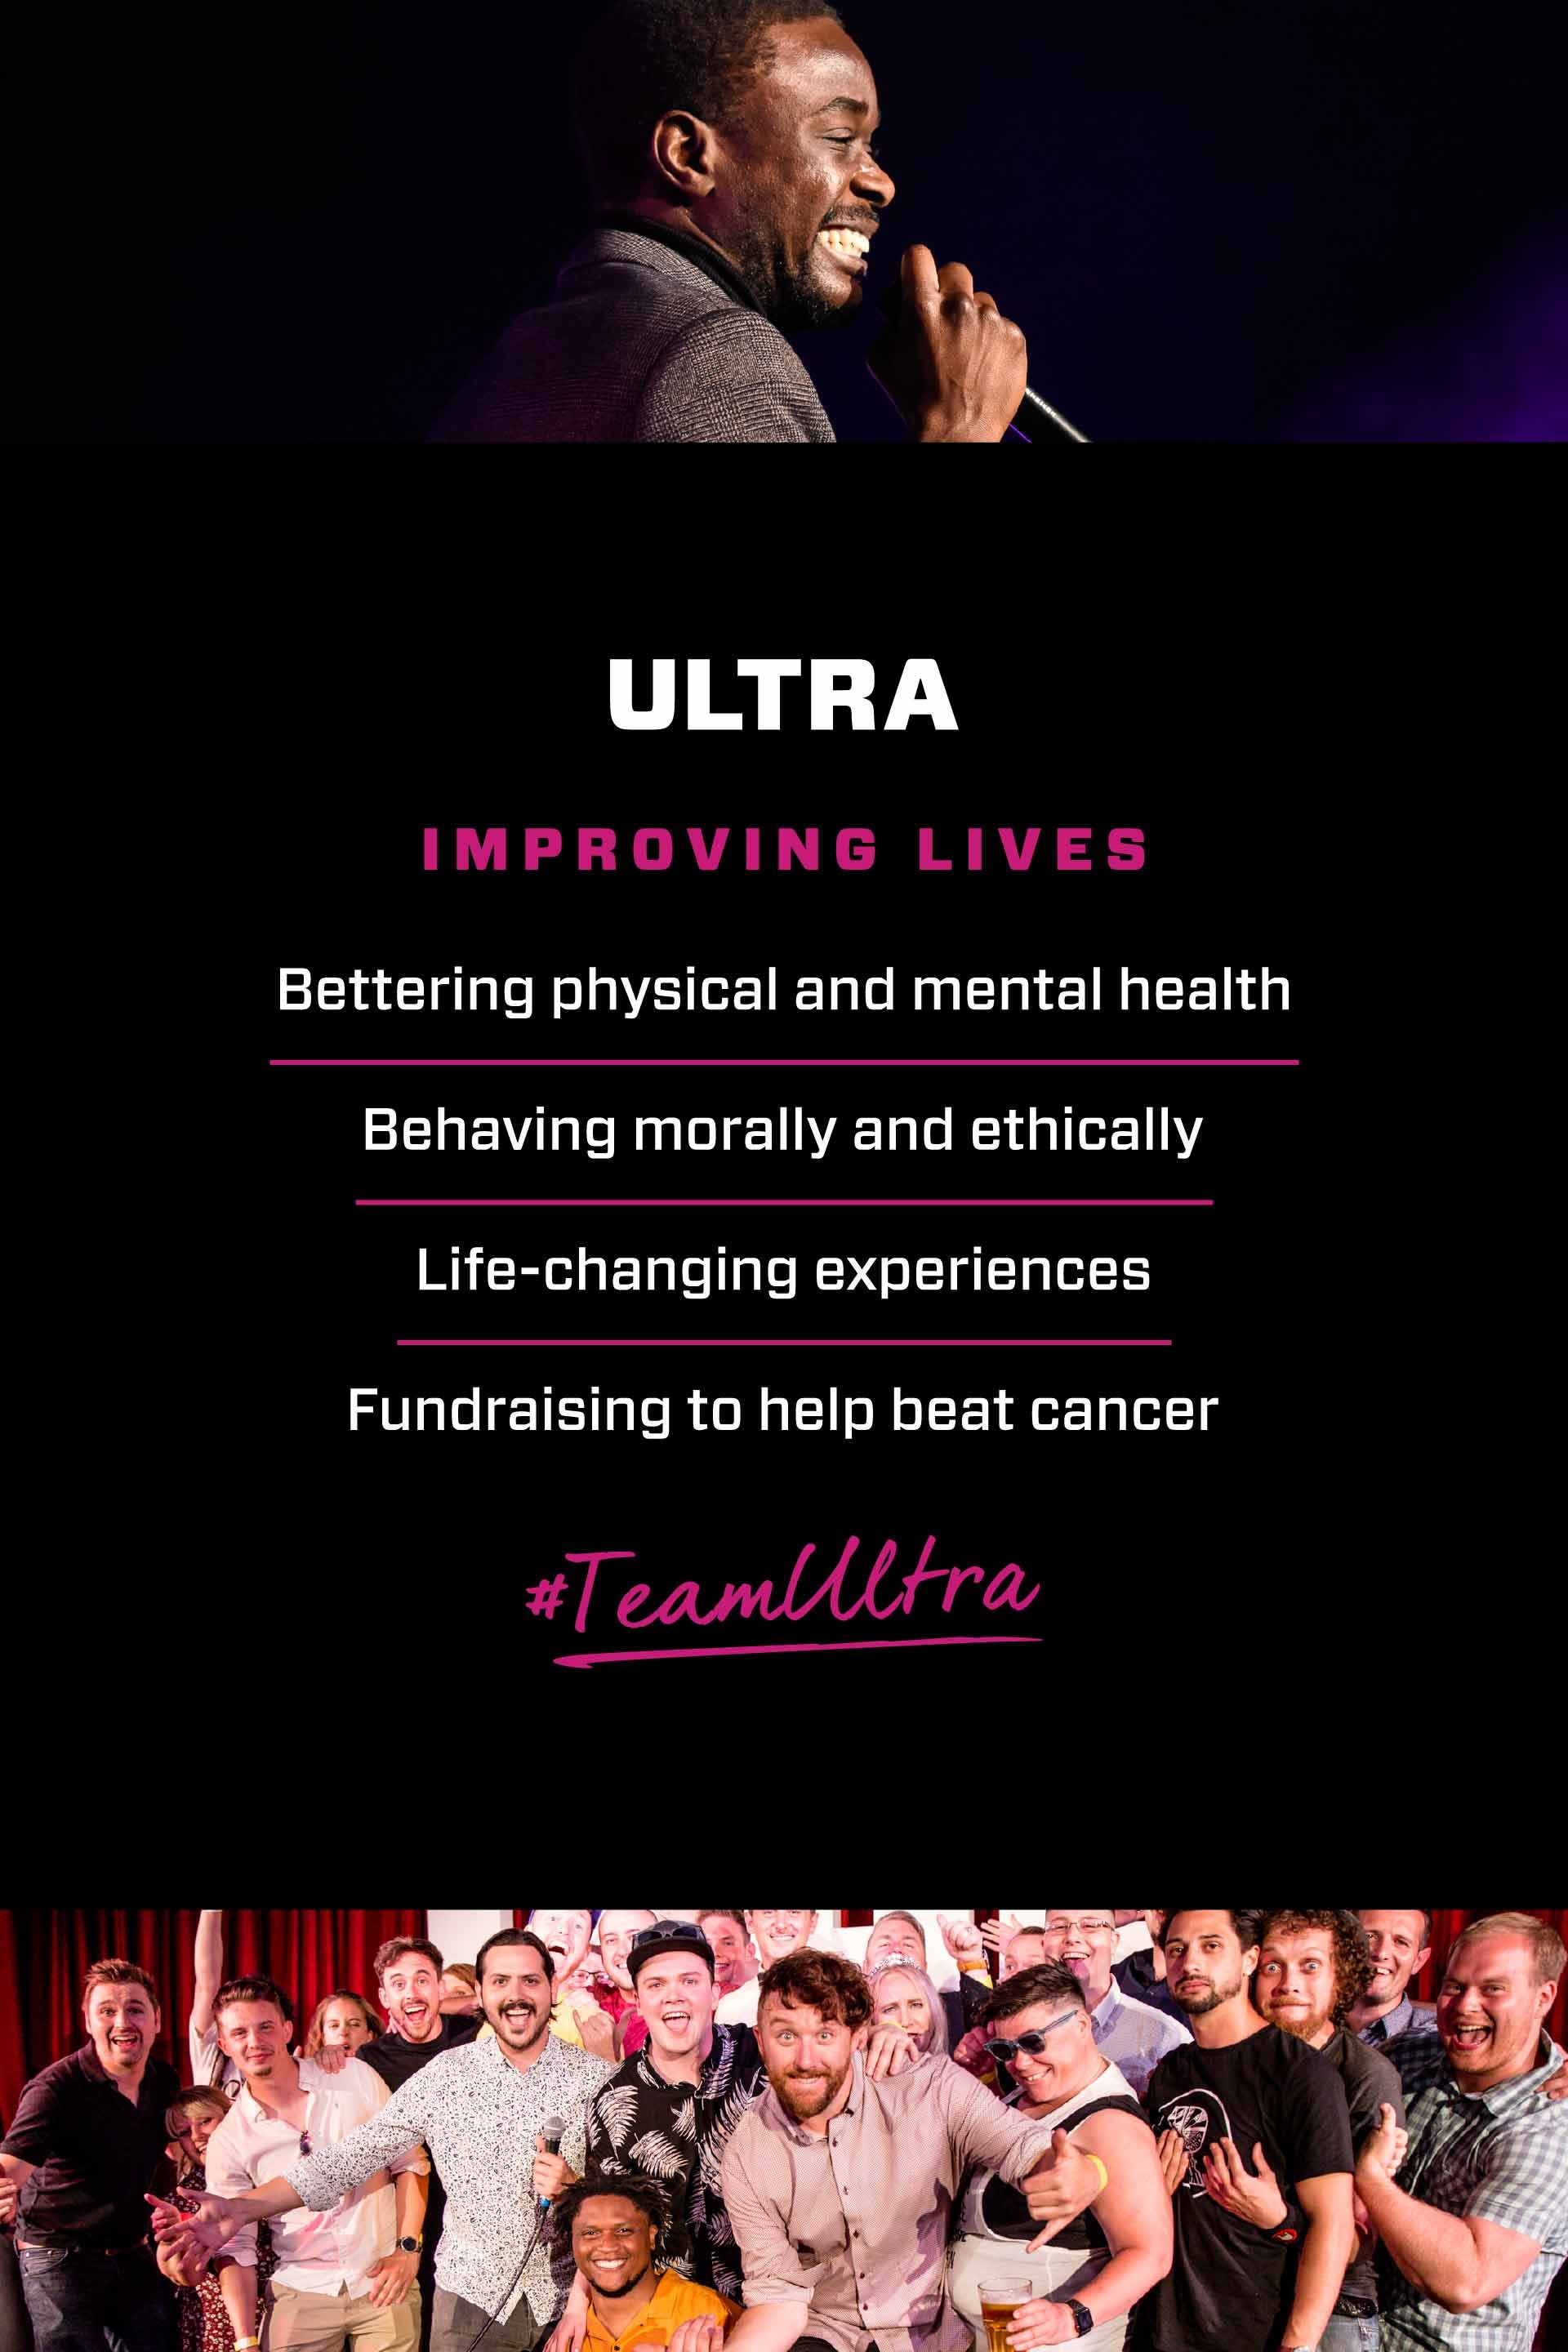 Ultra Events Mission Statements